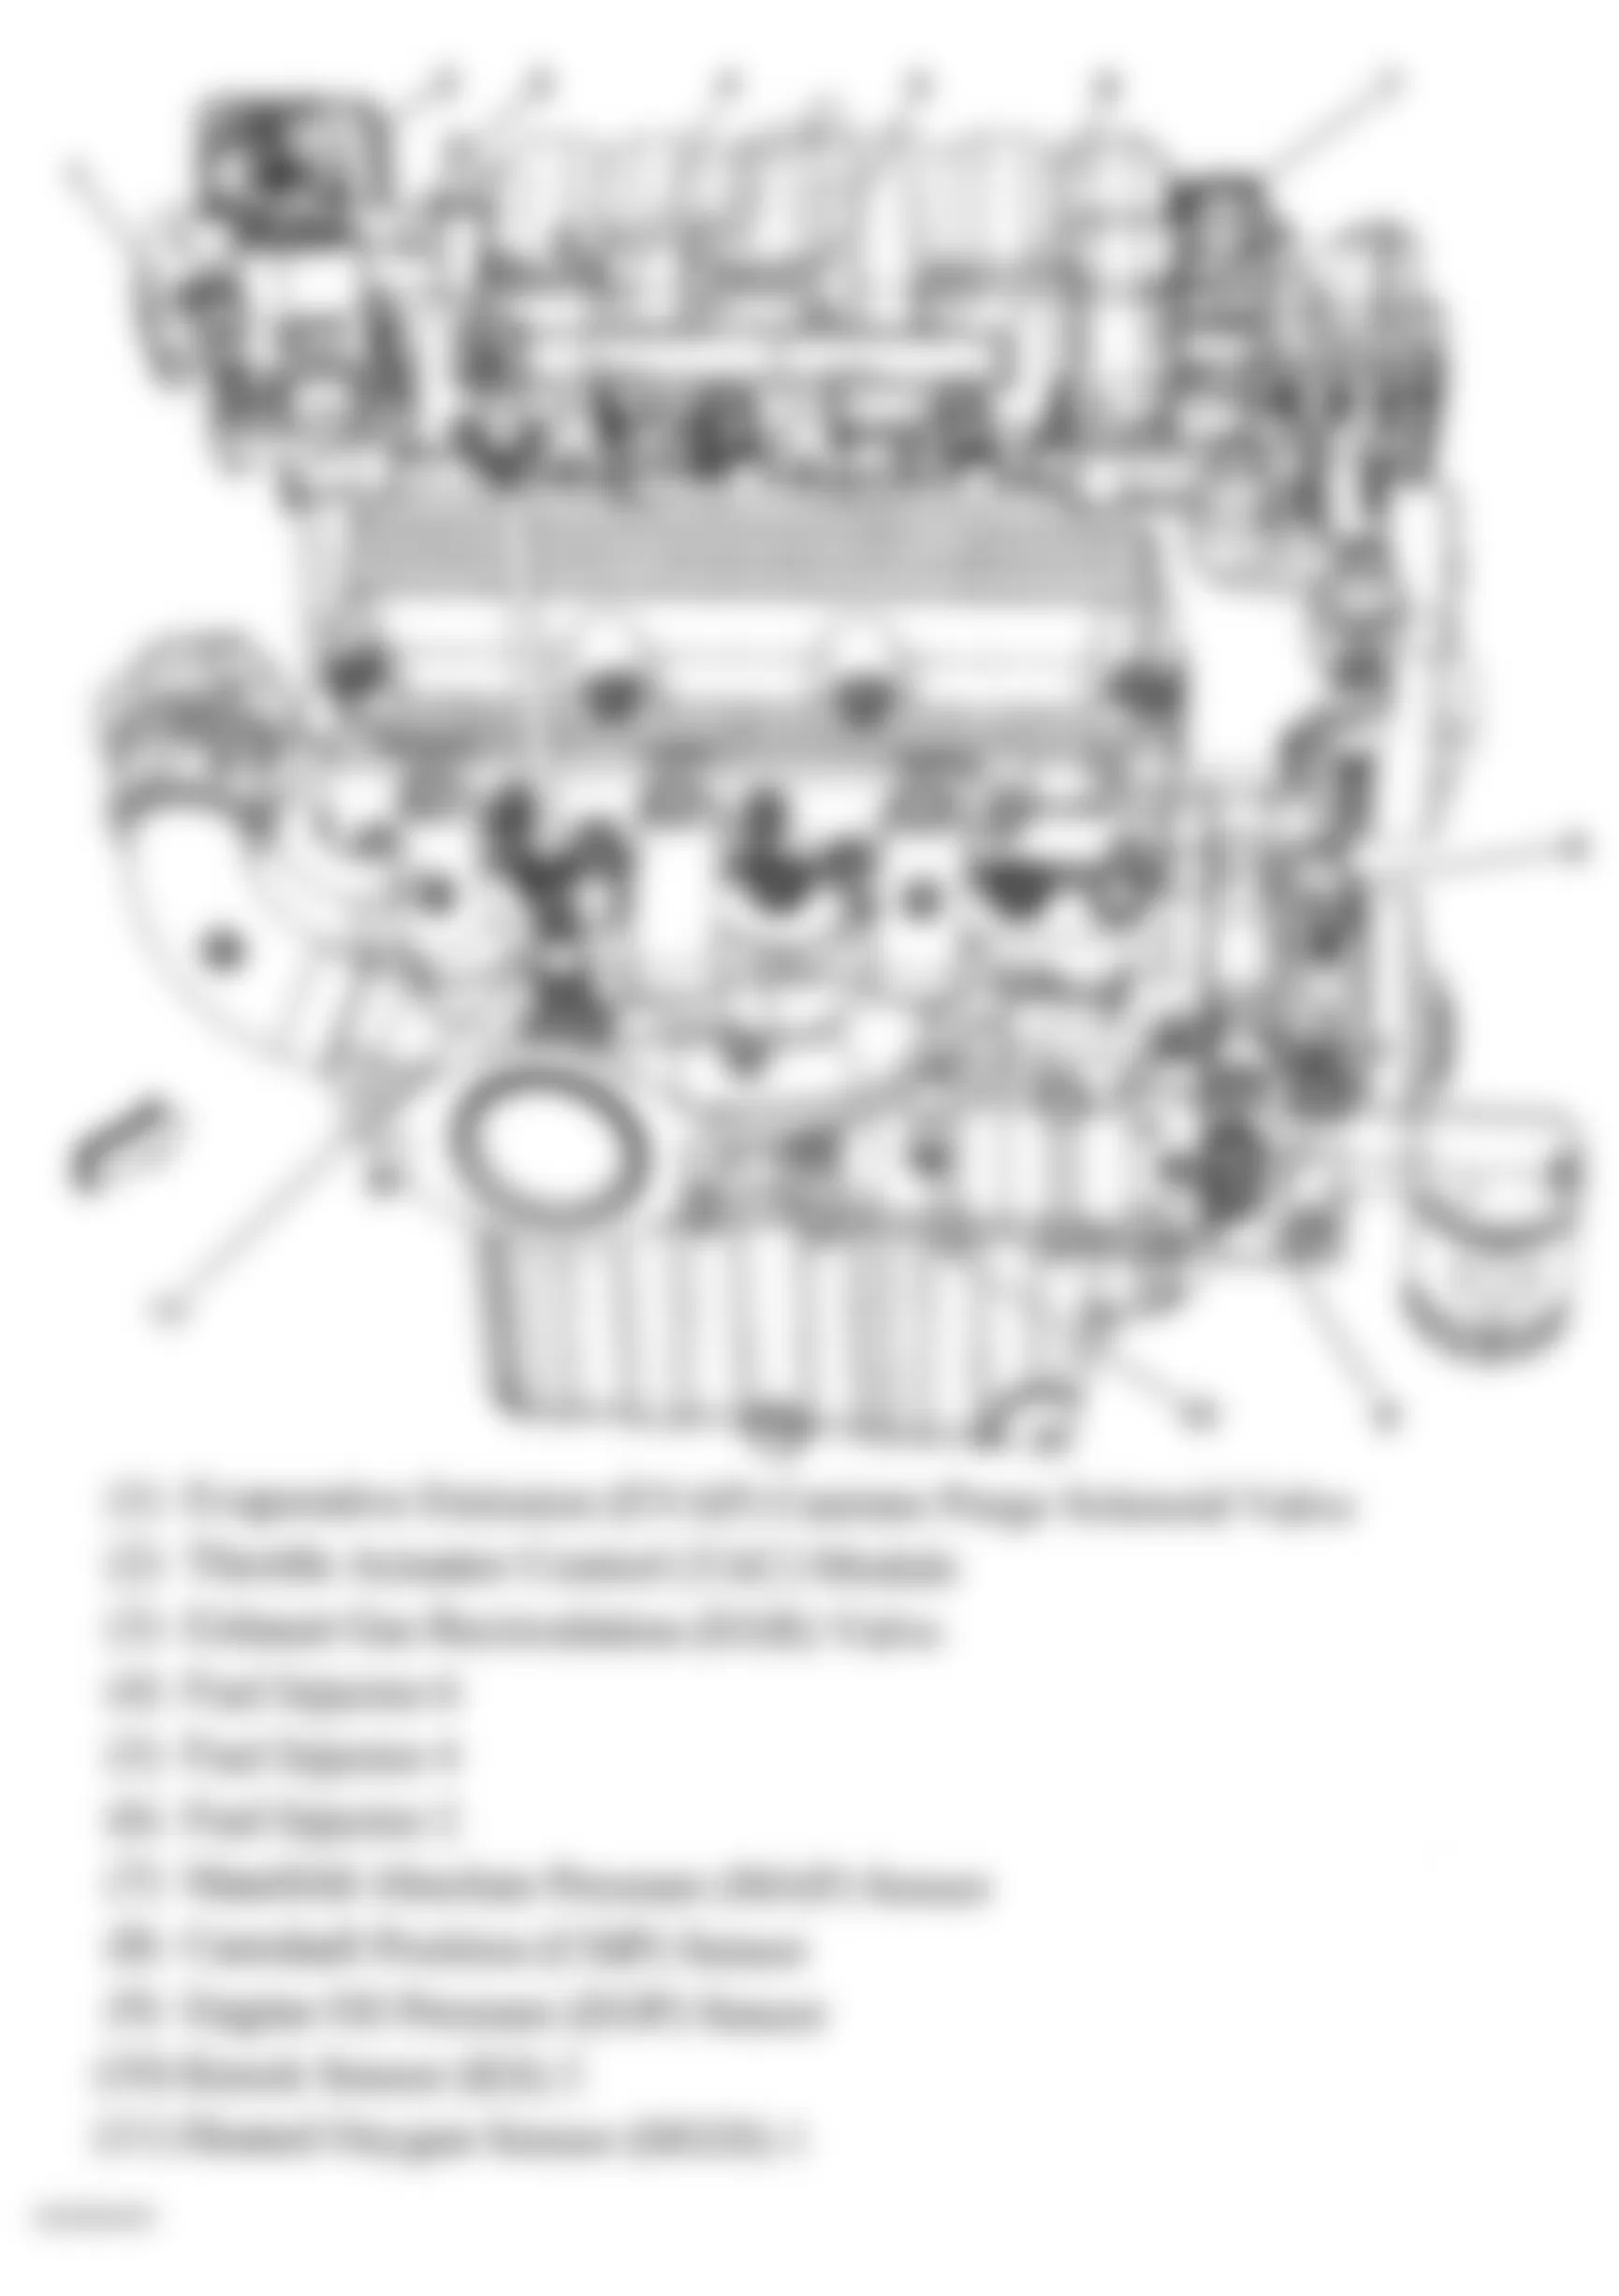 Buick Allure CXS 2006 - Component Locations -  Right Side Of Engine (3.8L)